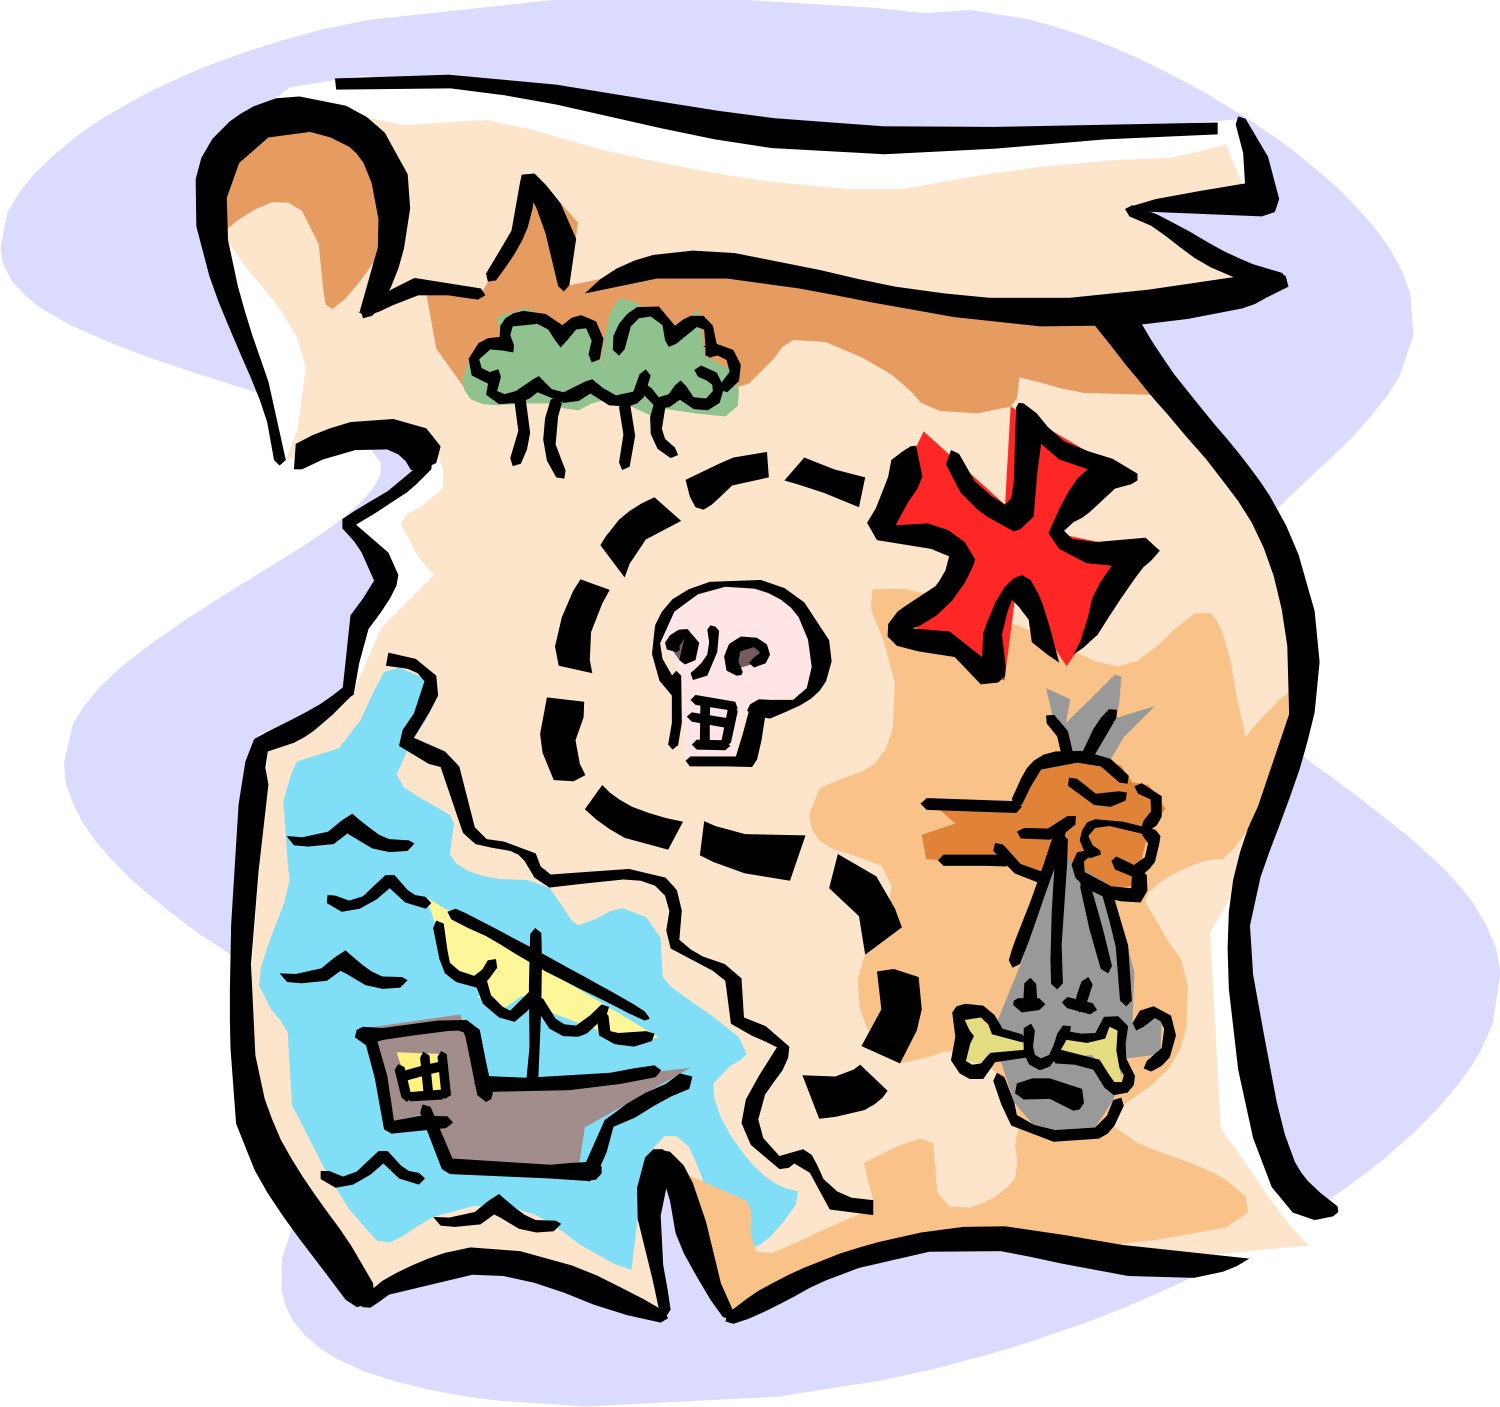 Pirate Maps Of The Treasure Island Clipart - ClipArt Best